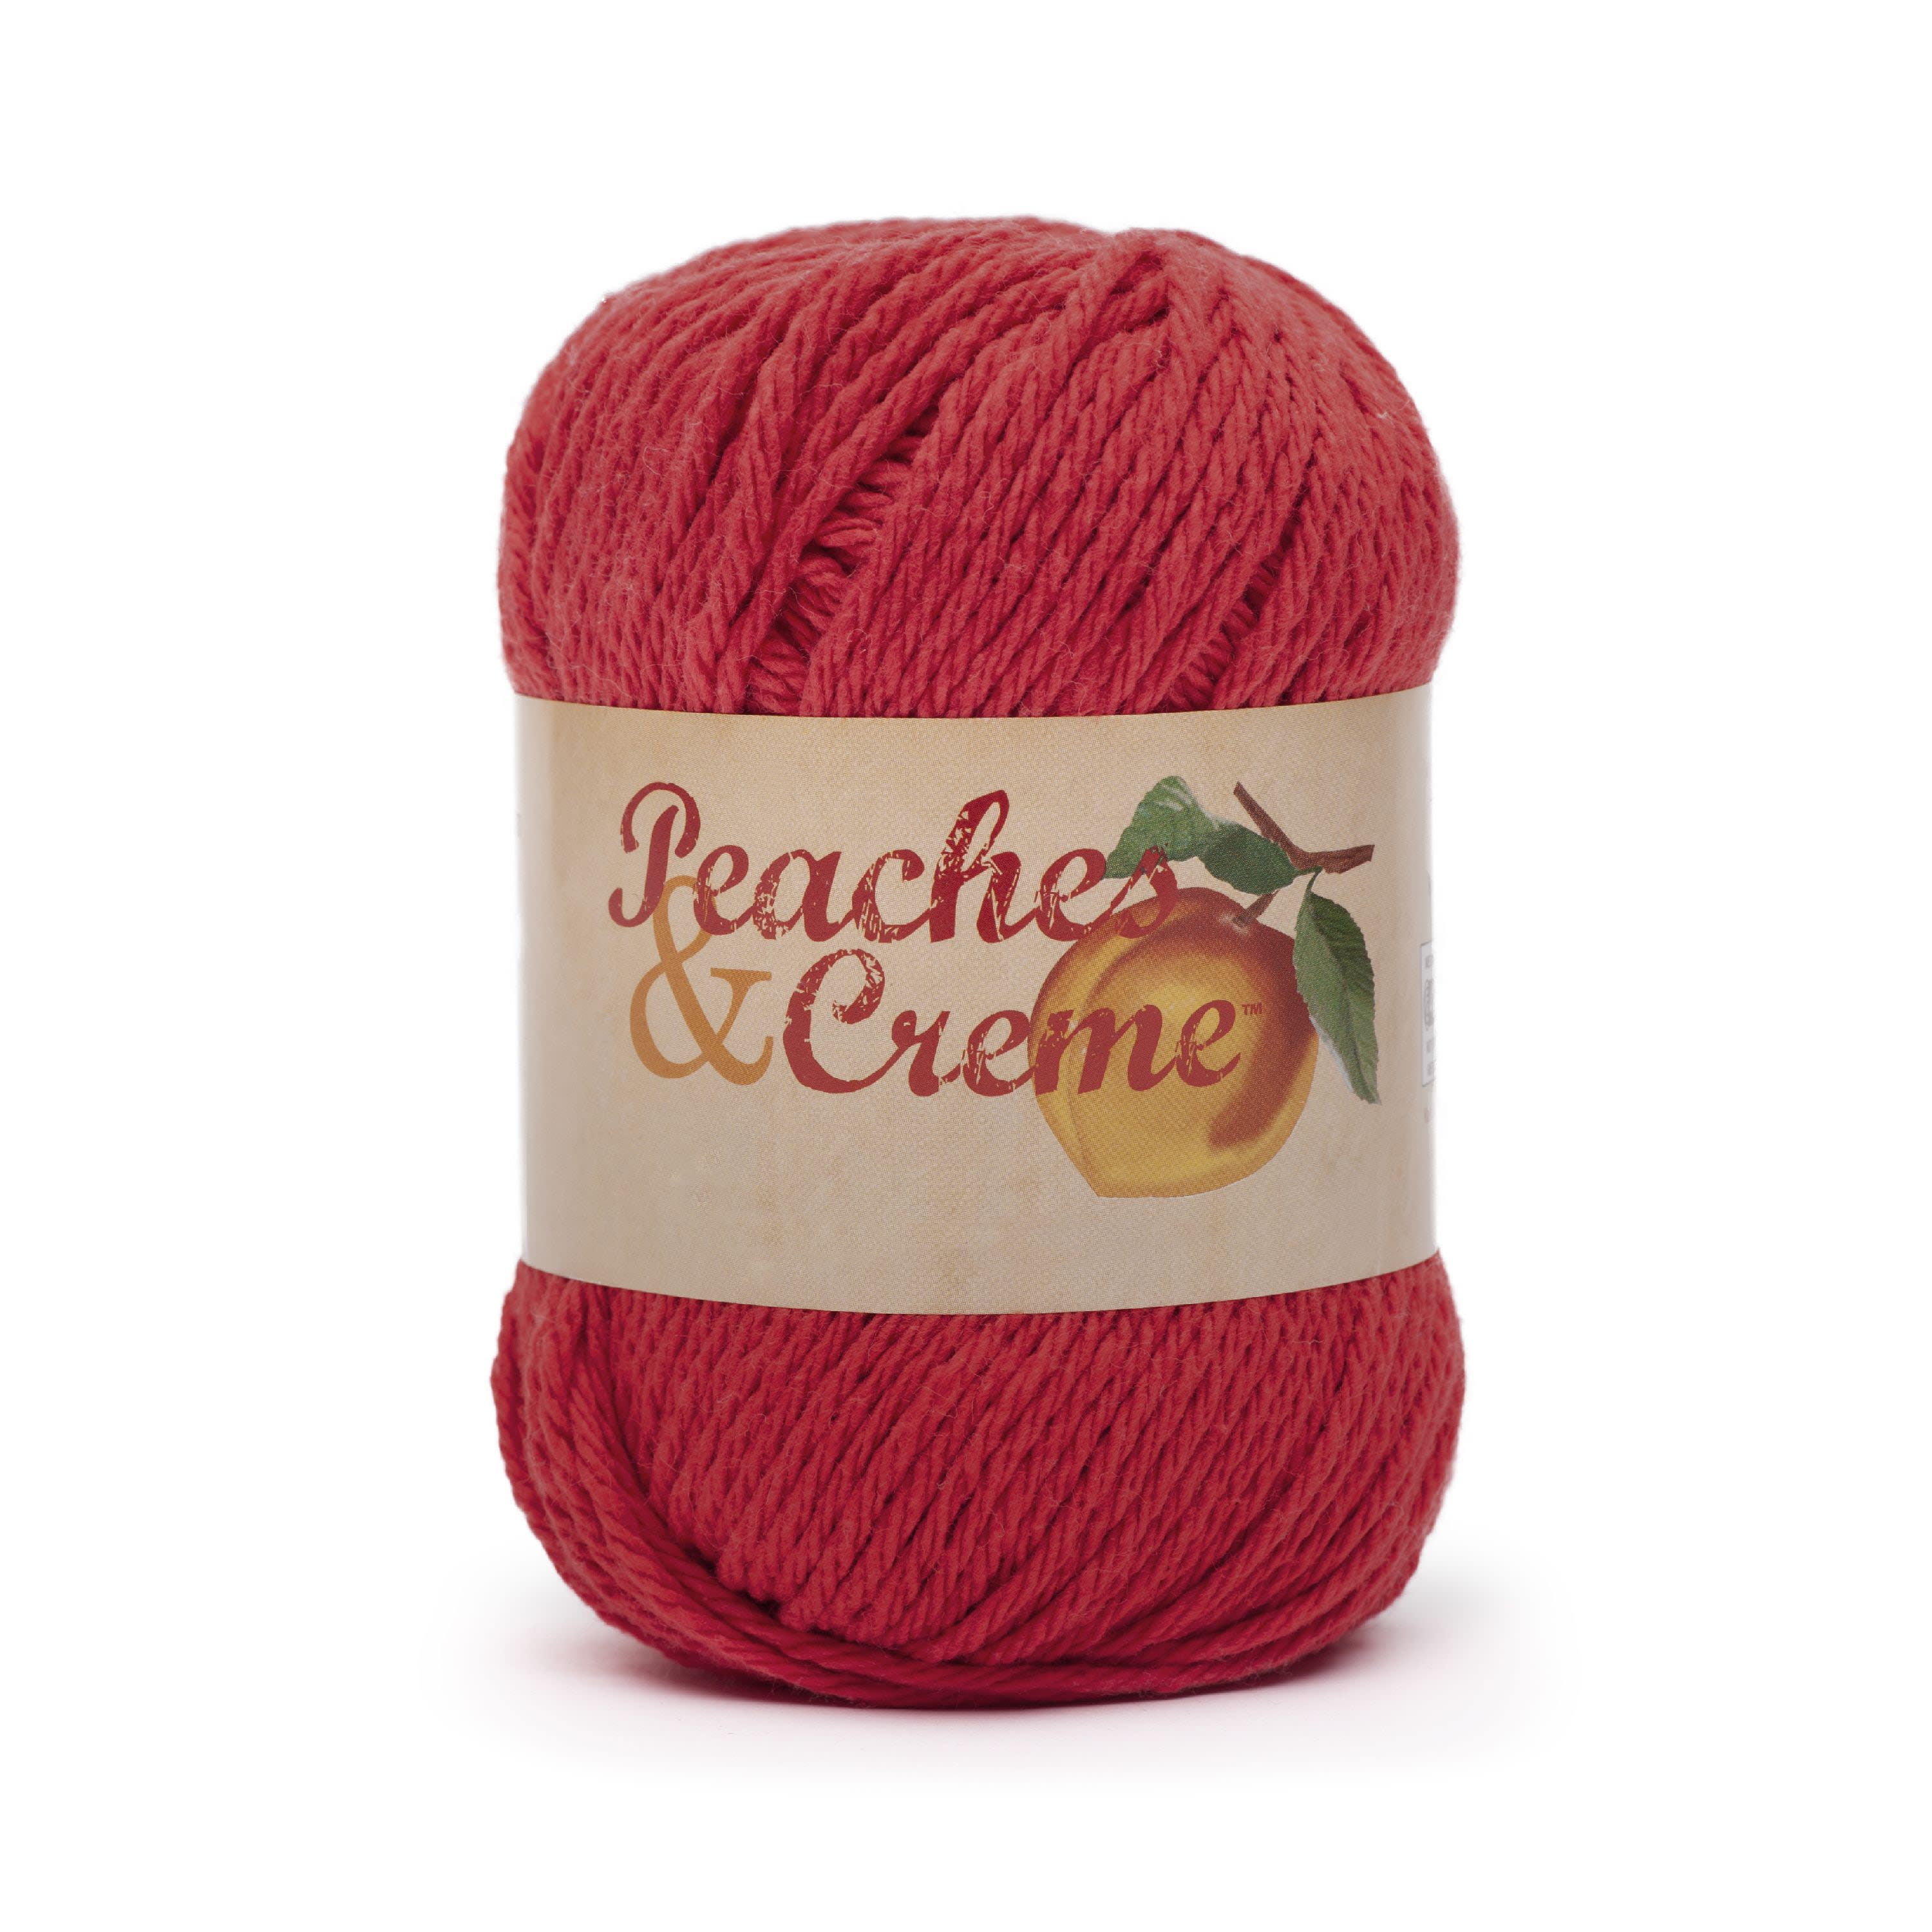 Peaches & Creme Solid 4 Medium Cotton Yarn, Red 2.5oz/70.9g, 120 Yards -  DroneUp Delivery